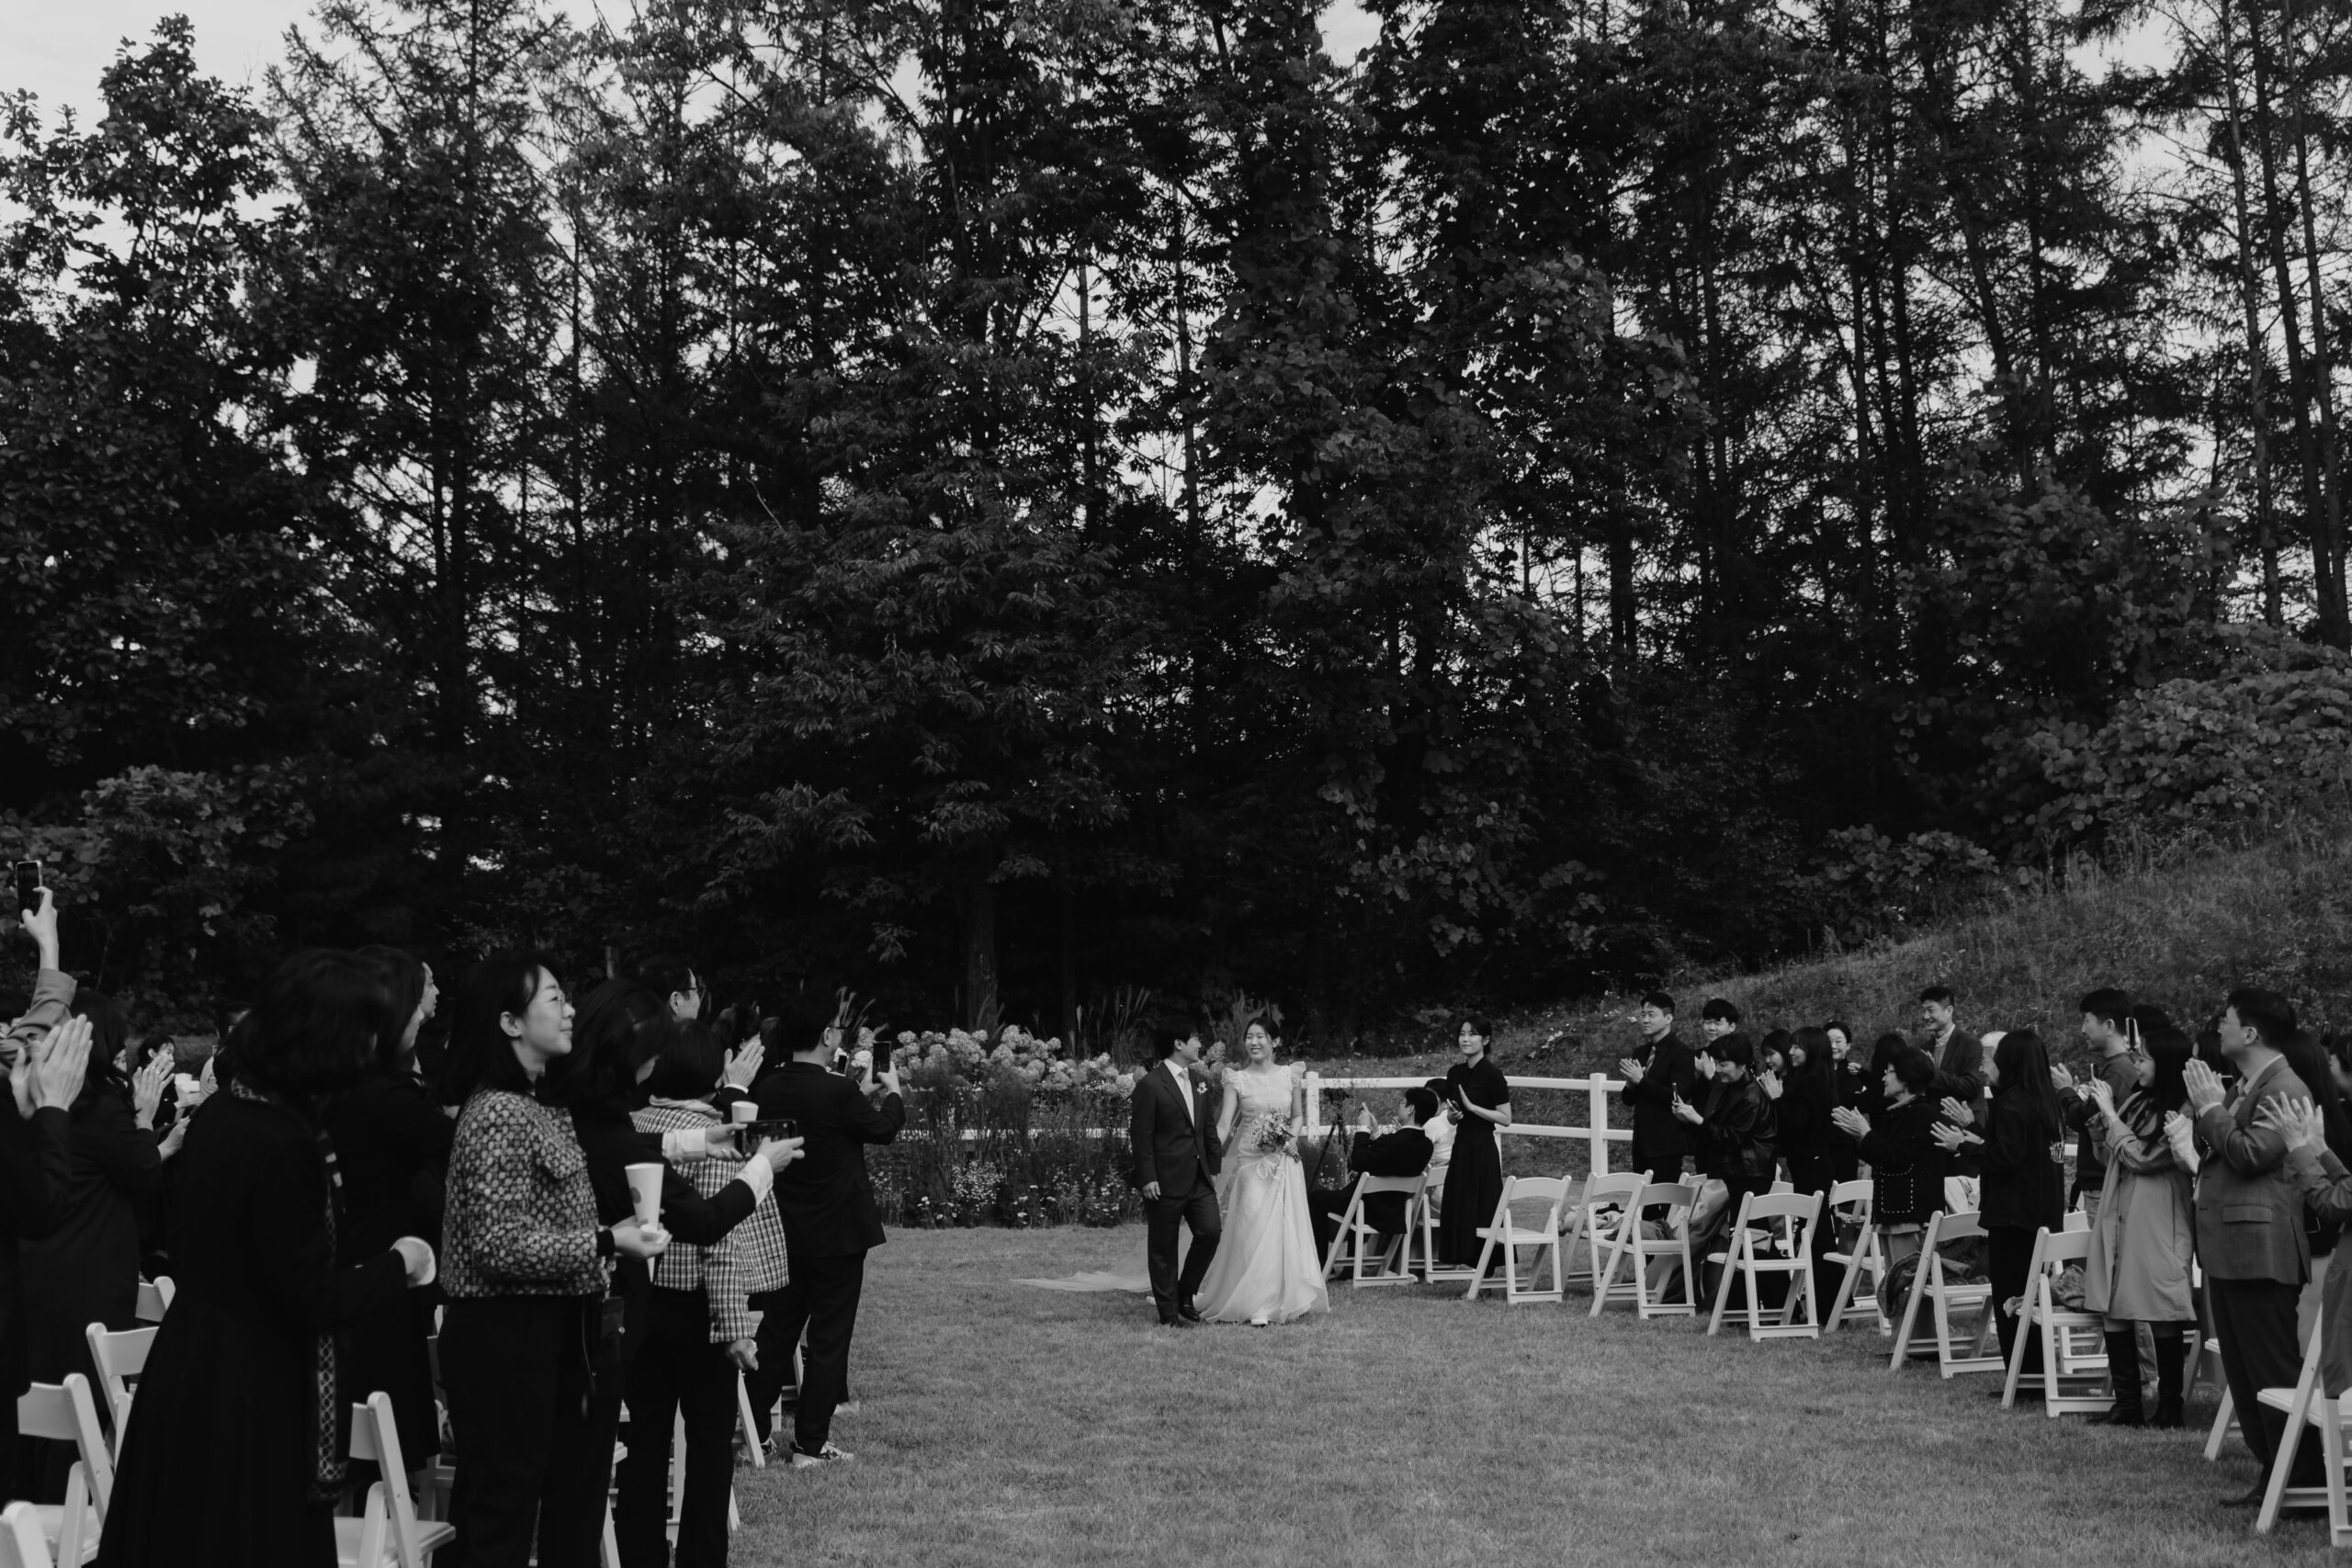 A couple in wedding attire walks down the aisle outdoors, surrounded by seated guests who are clapping and standing in an aisle lined by chairs. Trees and greenery serve as the backdrop to this enchanting Korean wedding.